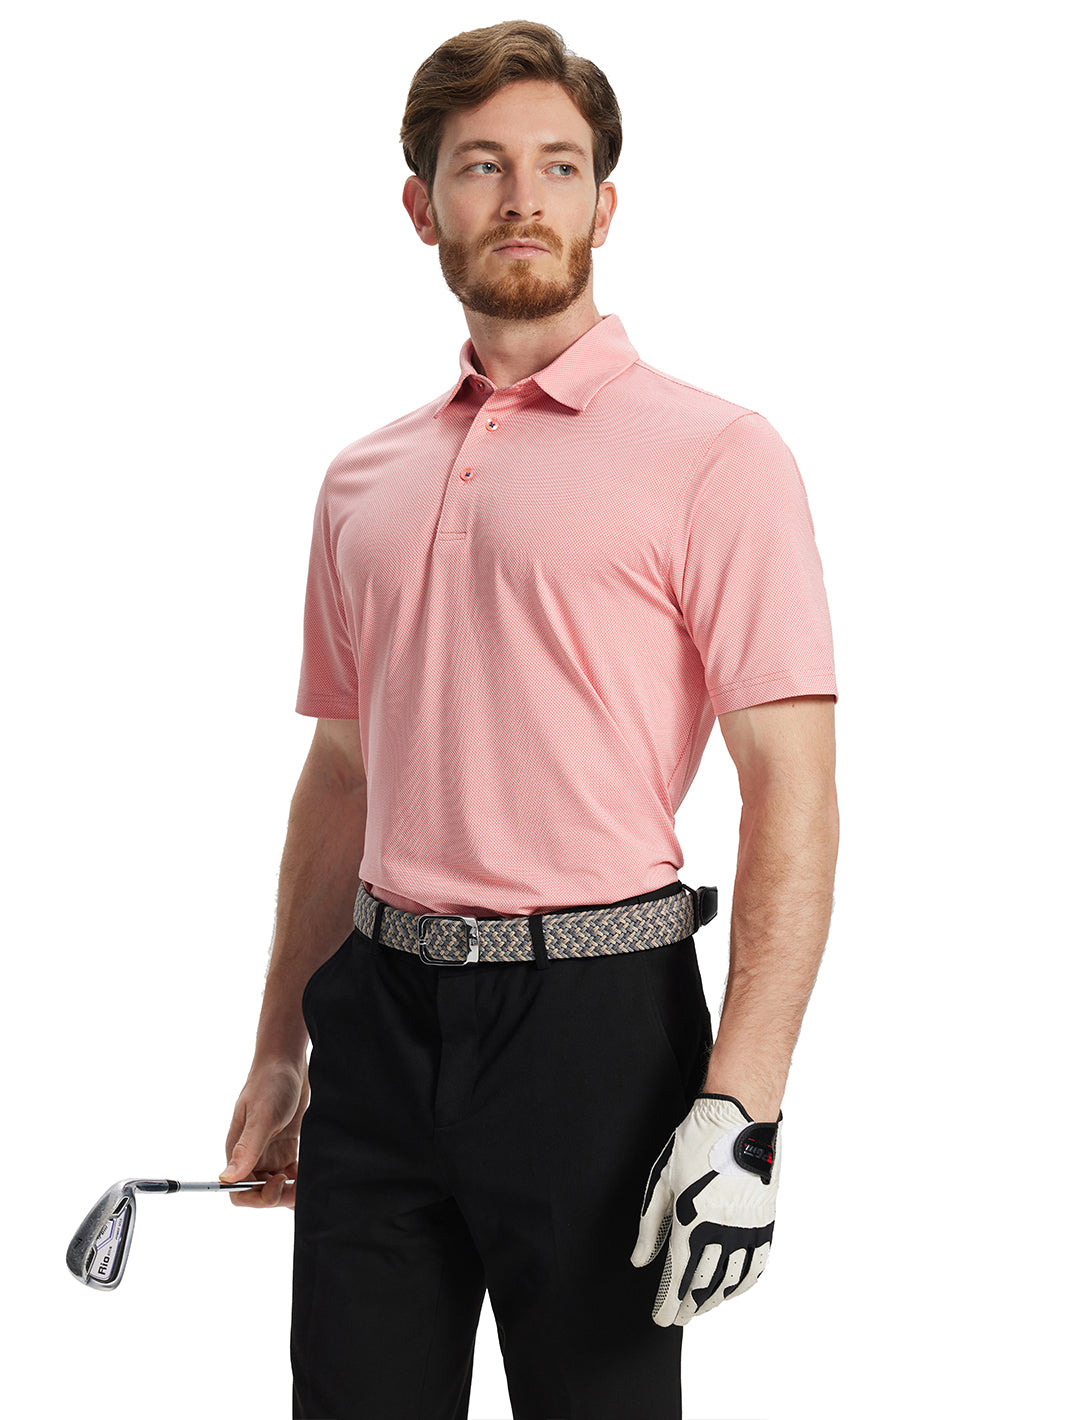 Men's Golf Shirts Dry Fit Jacquard Performance Moisture Wicking Short Sleeve Collared Polo Shirts